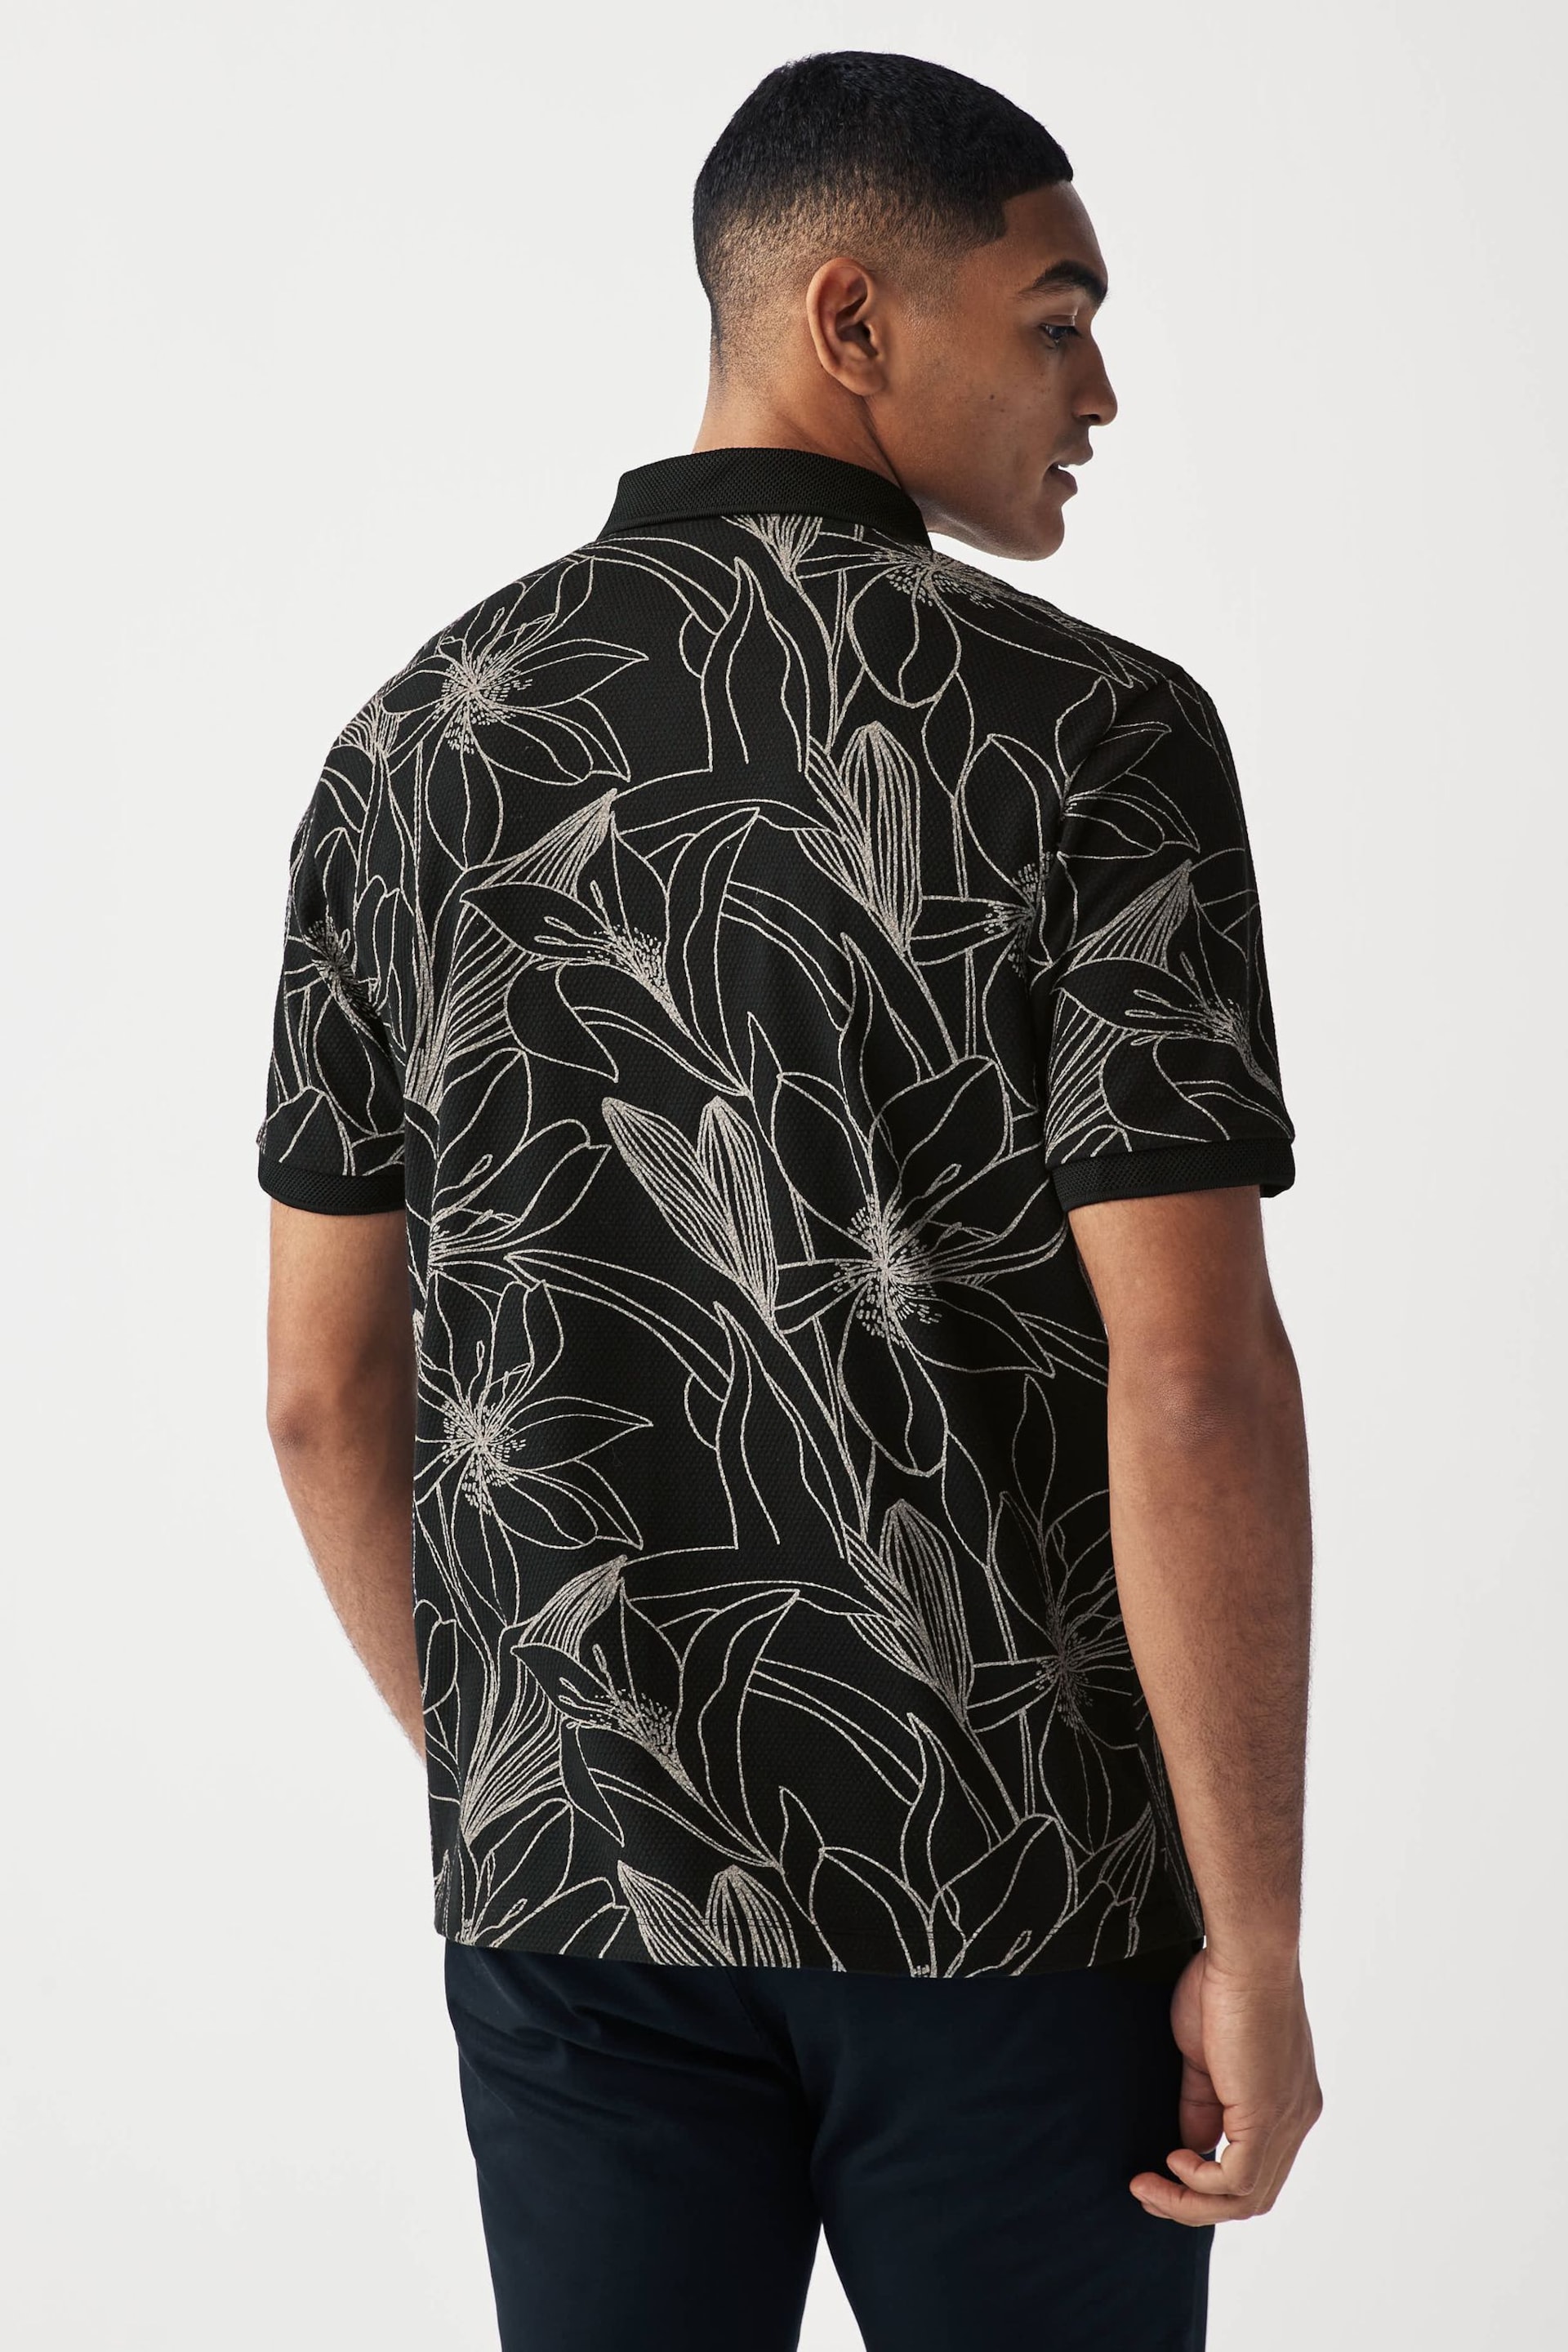 Black/White Floral Print Textured Polo Shirt - Image 3 of 8